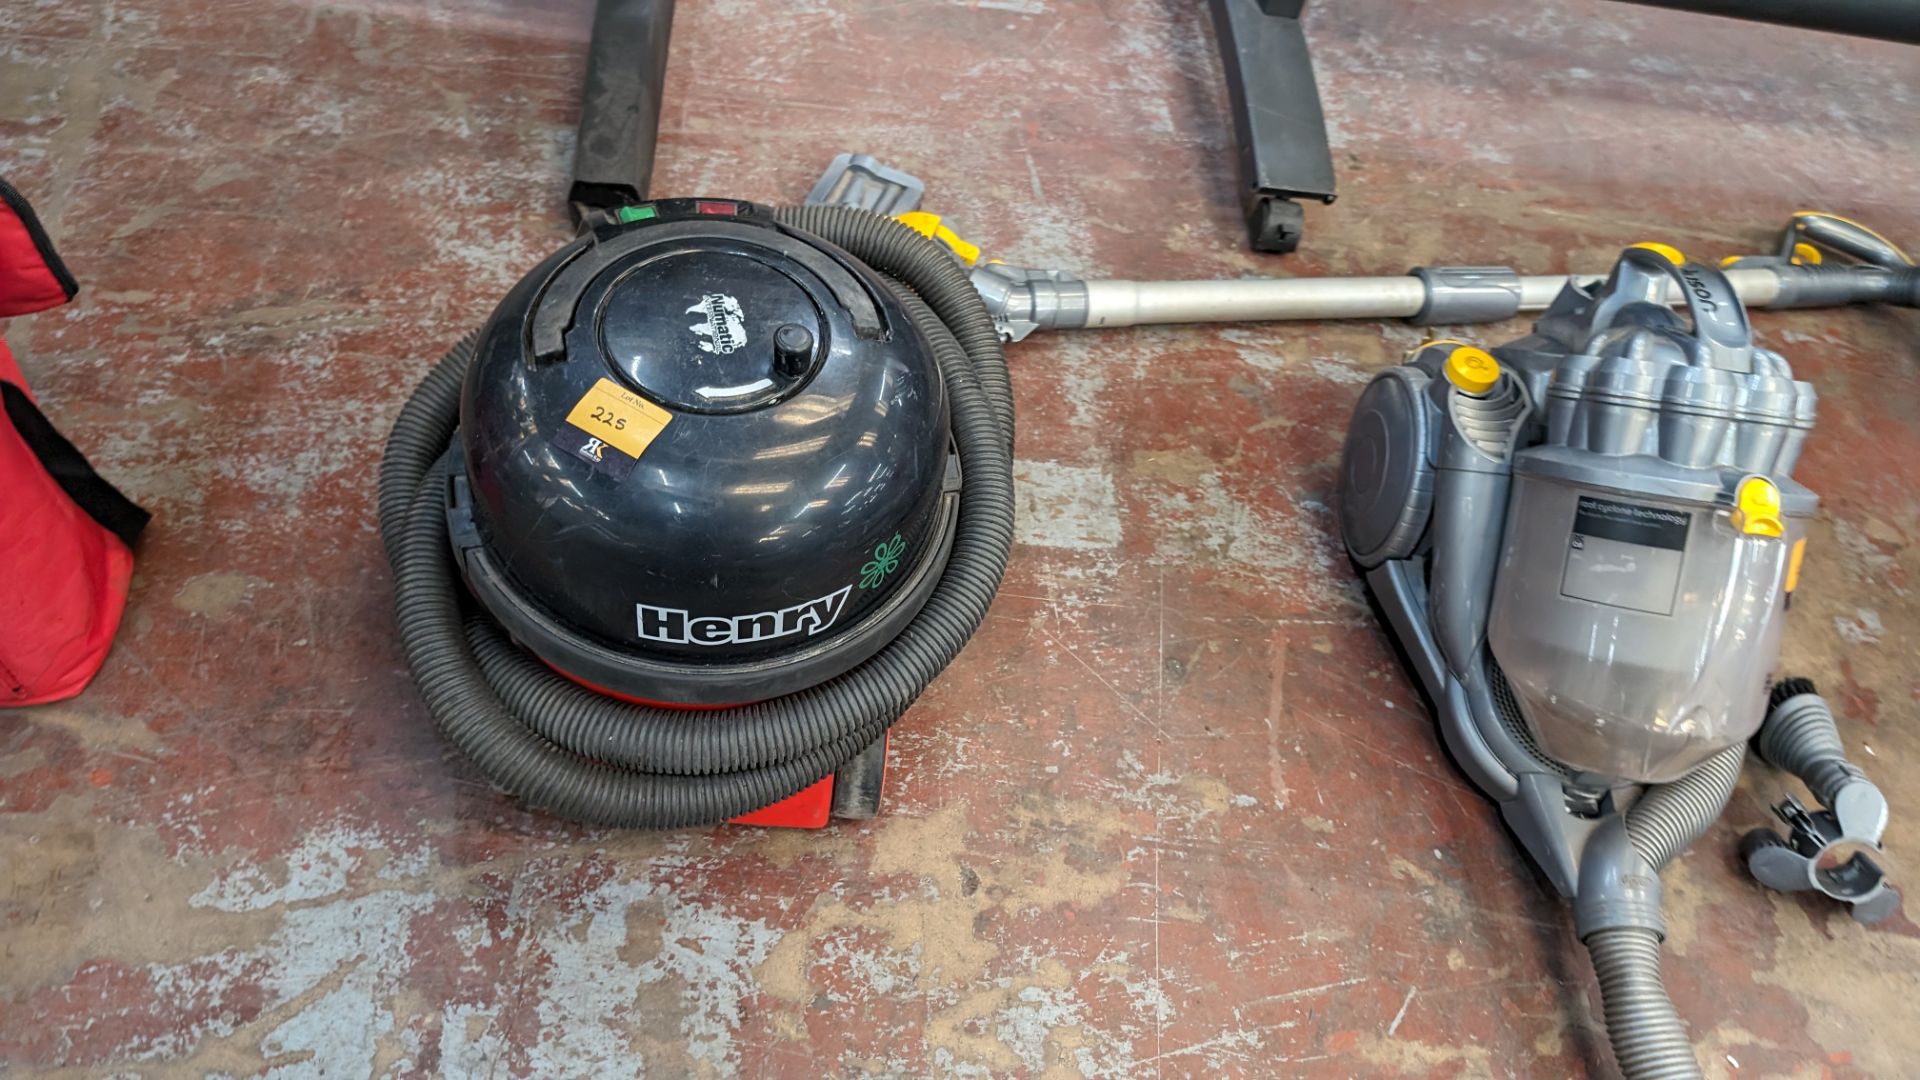 Henry vacuum cleaner - Image 2 of 5